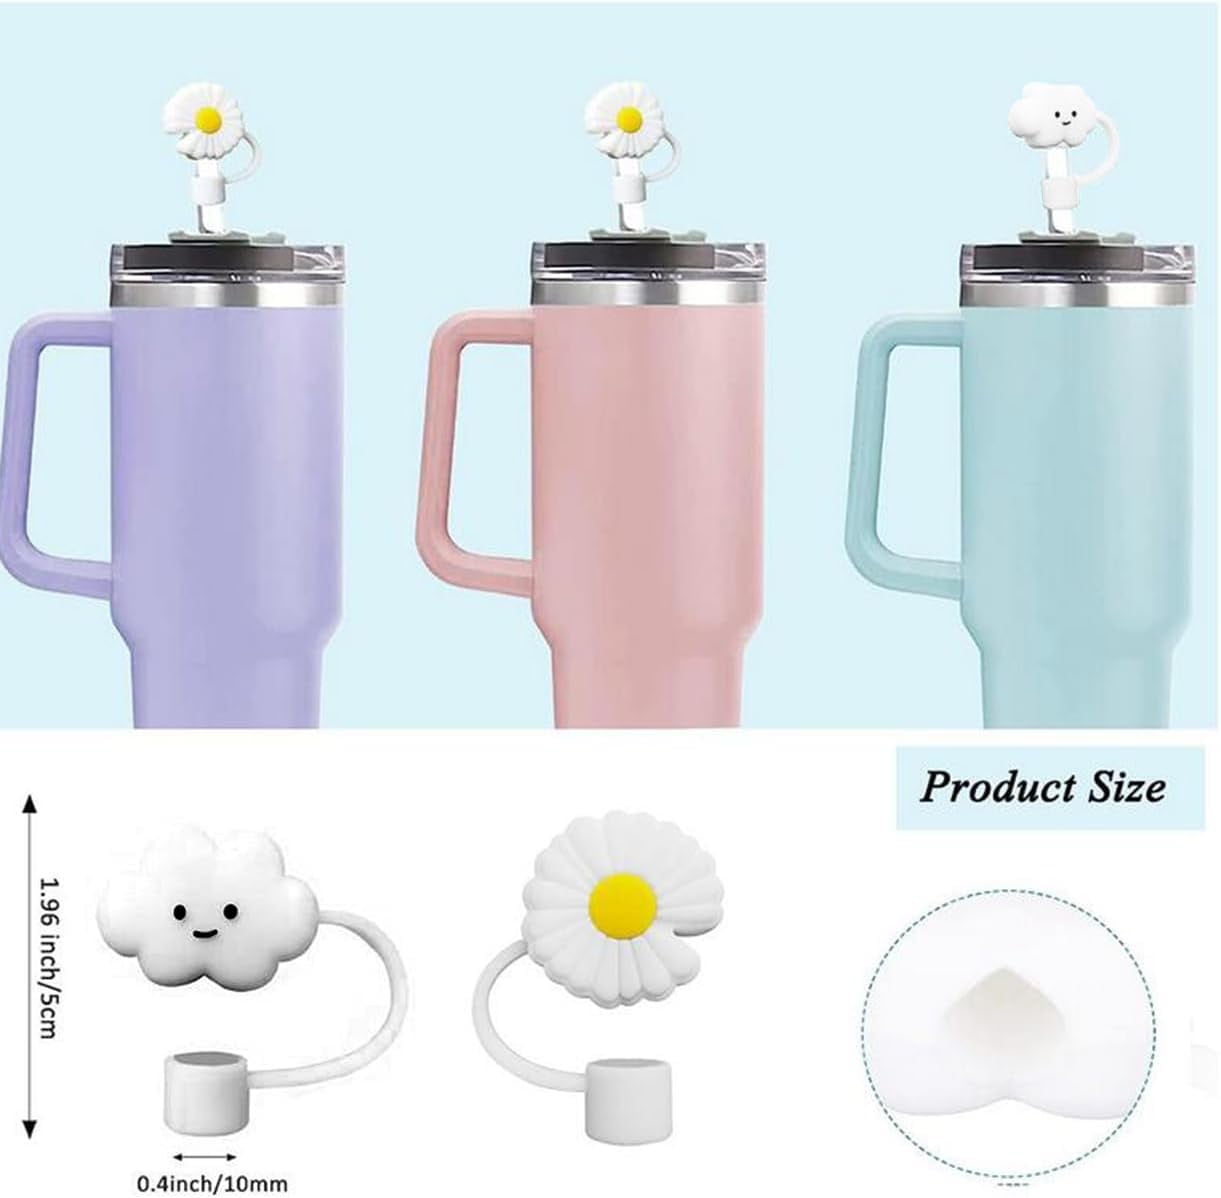 5 PCS Silicone Straw Covers Cap Compatible with Stanley 30&40 Oz Cup, 10mm  Cute Flower Straw Toppers for Tumblers, Dust-Proof Drinking Straw Caps for